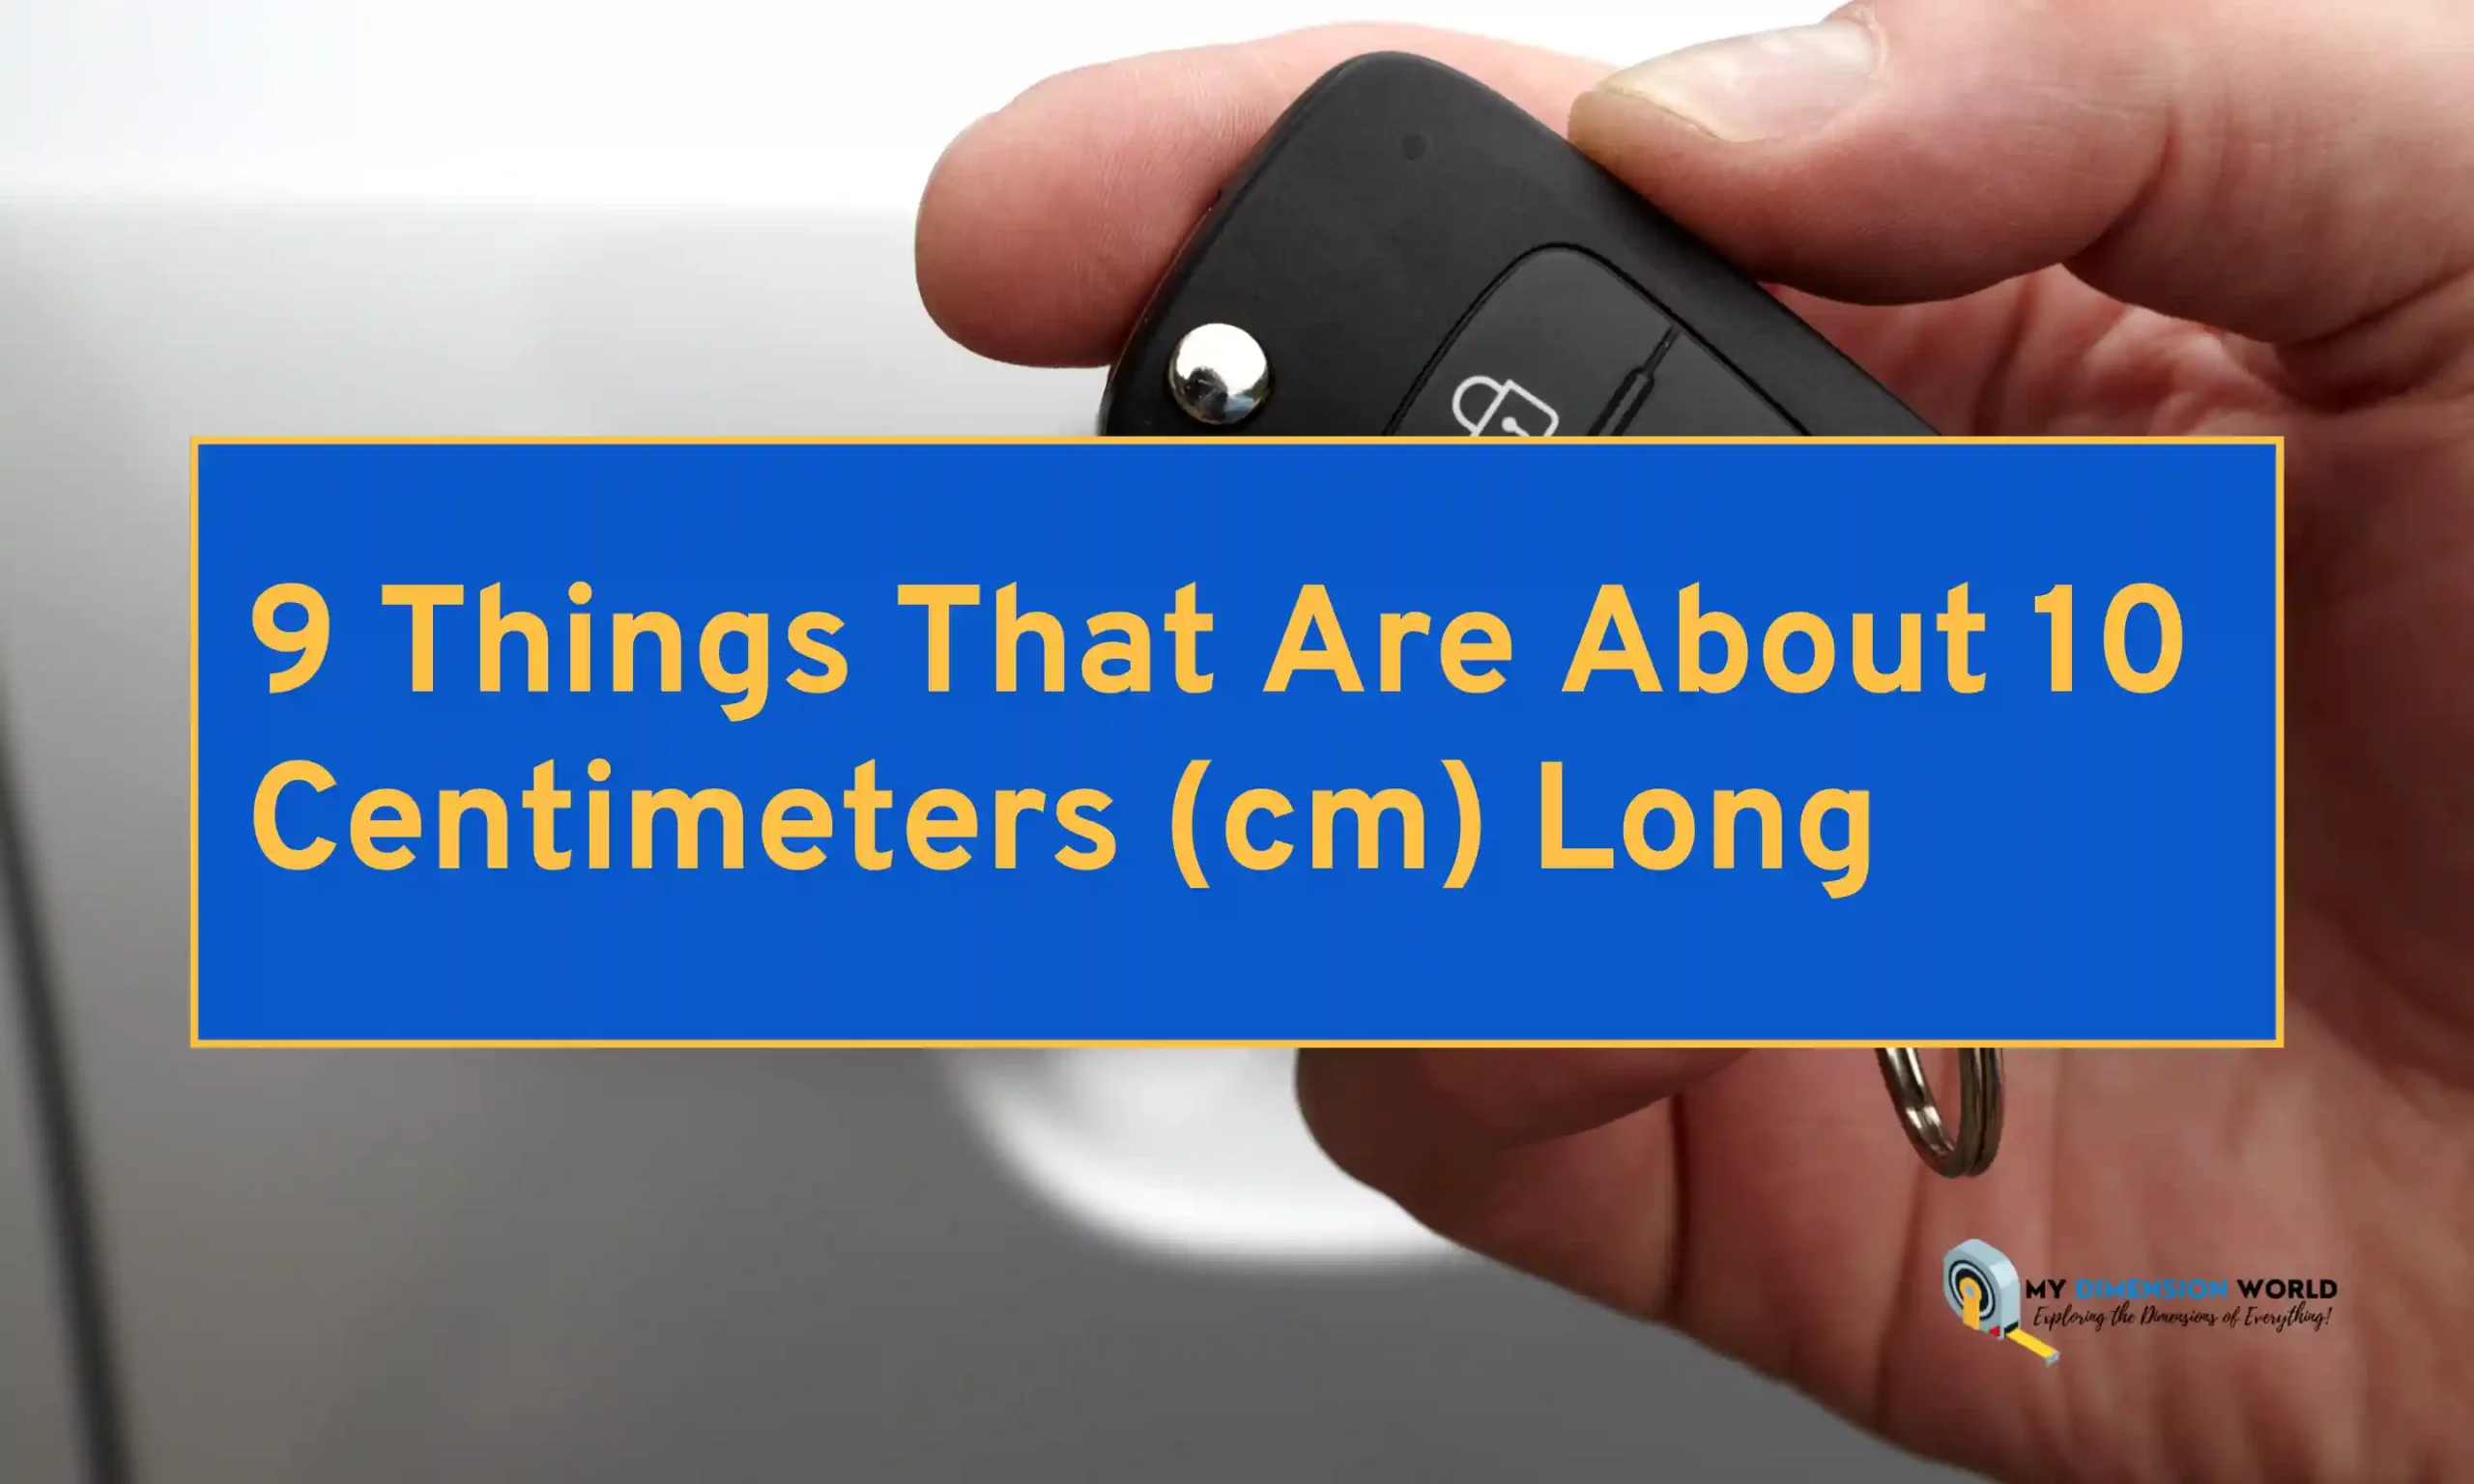 9 Things That Are About 10 Centimeters (cm) Long